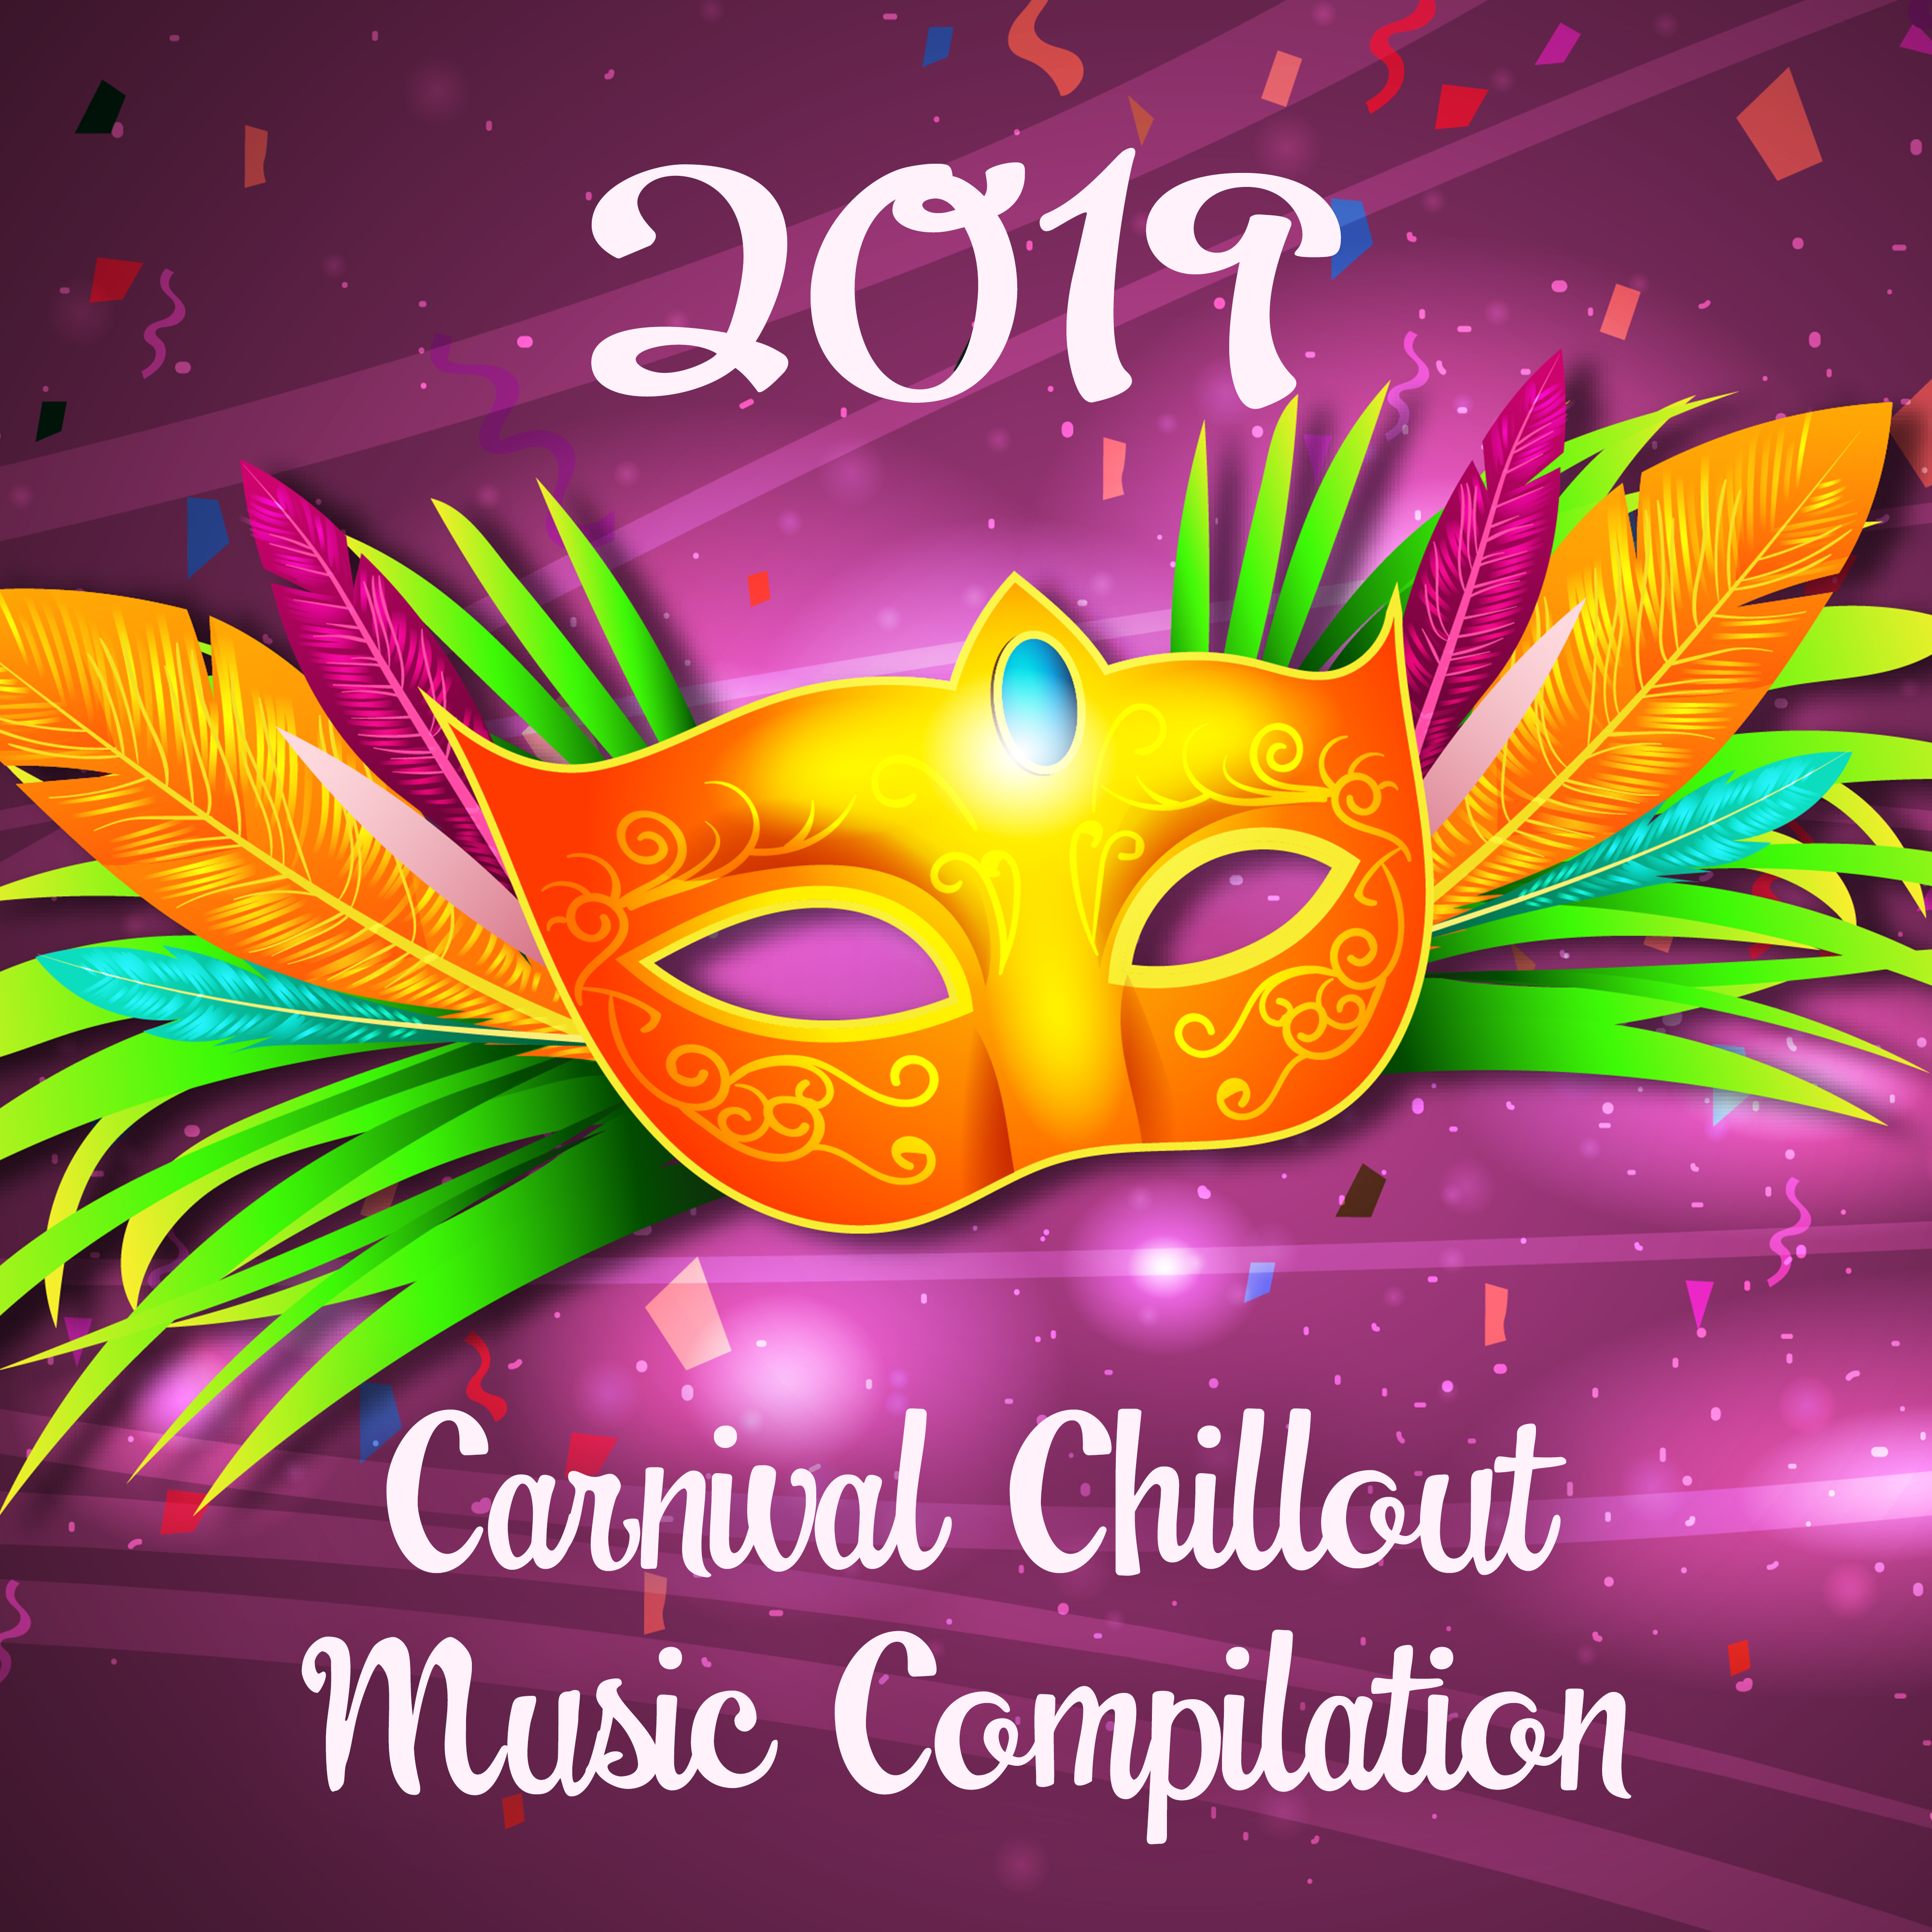 2019 Carnival Chillout Music Compilation